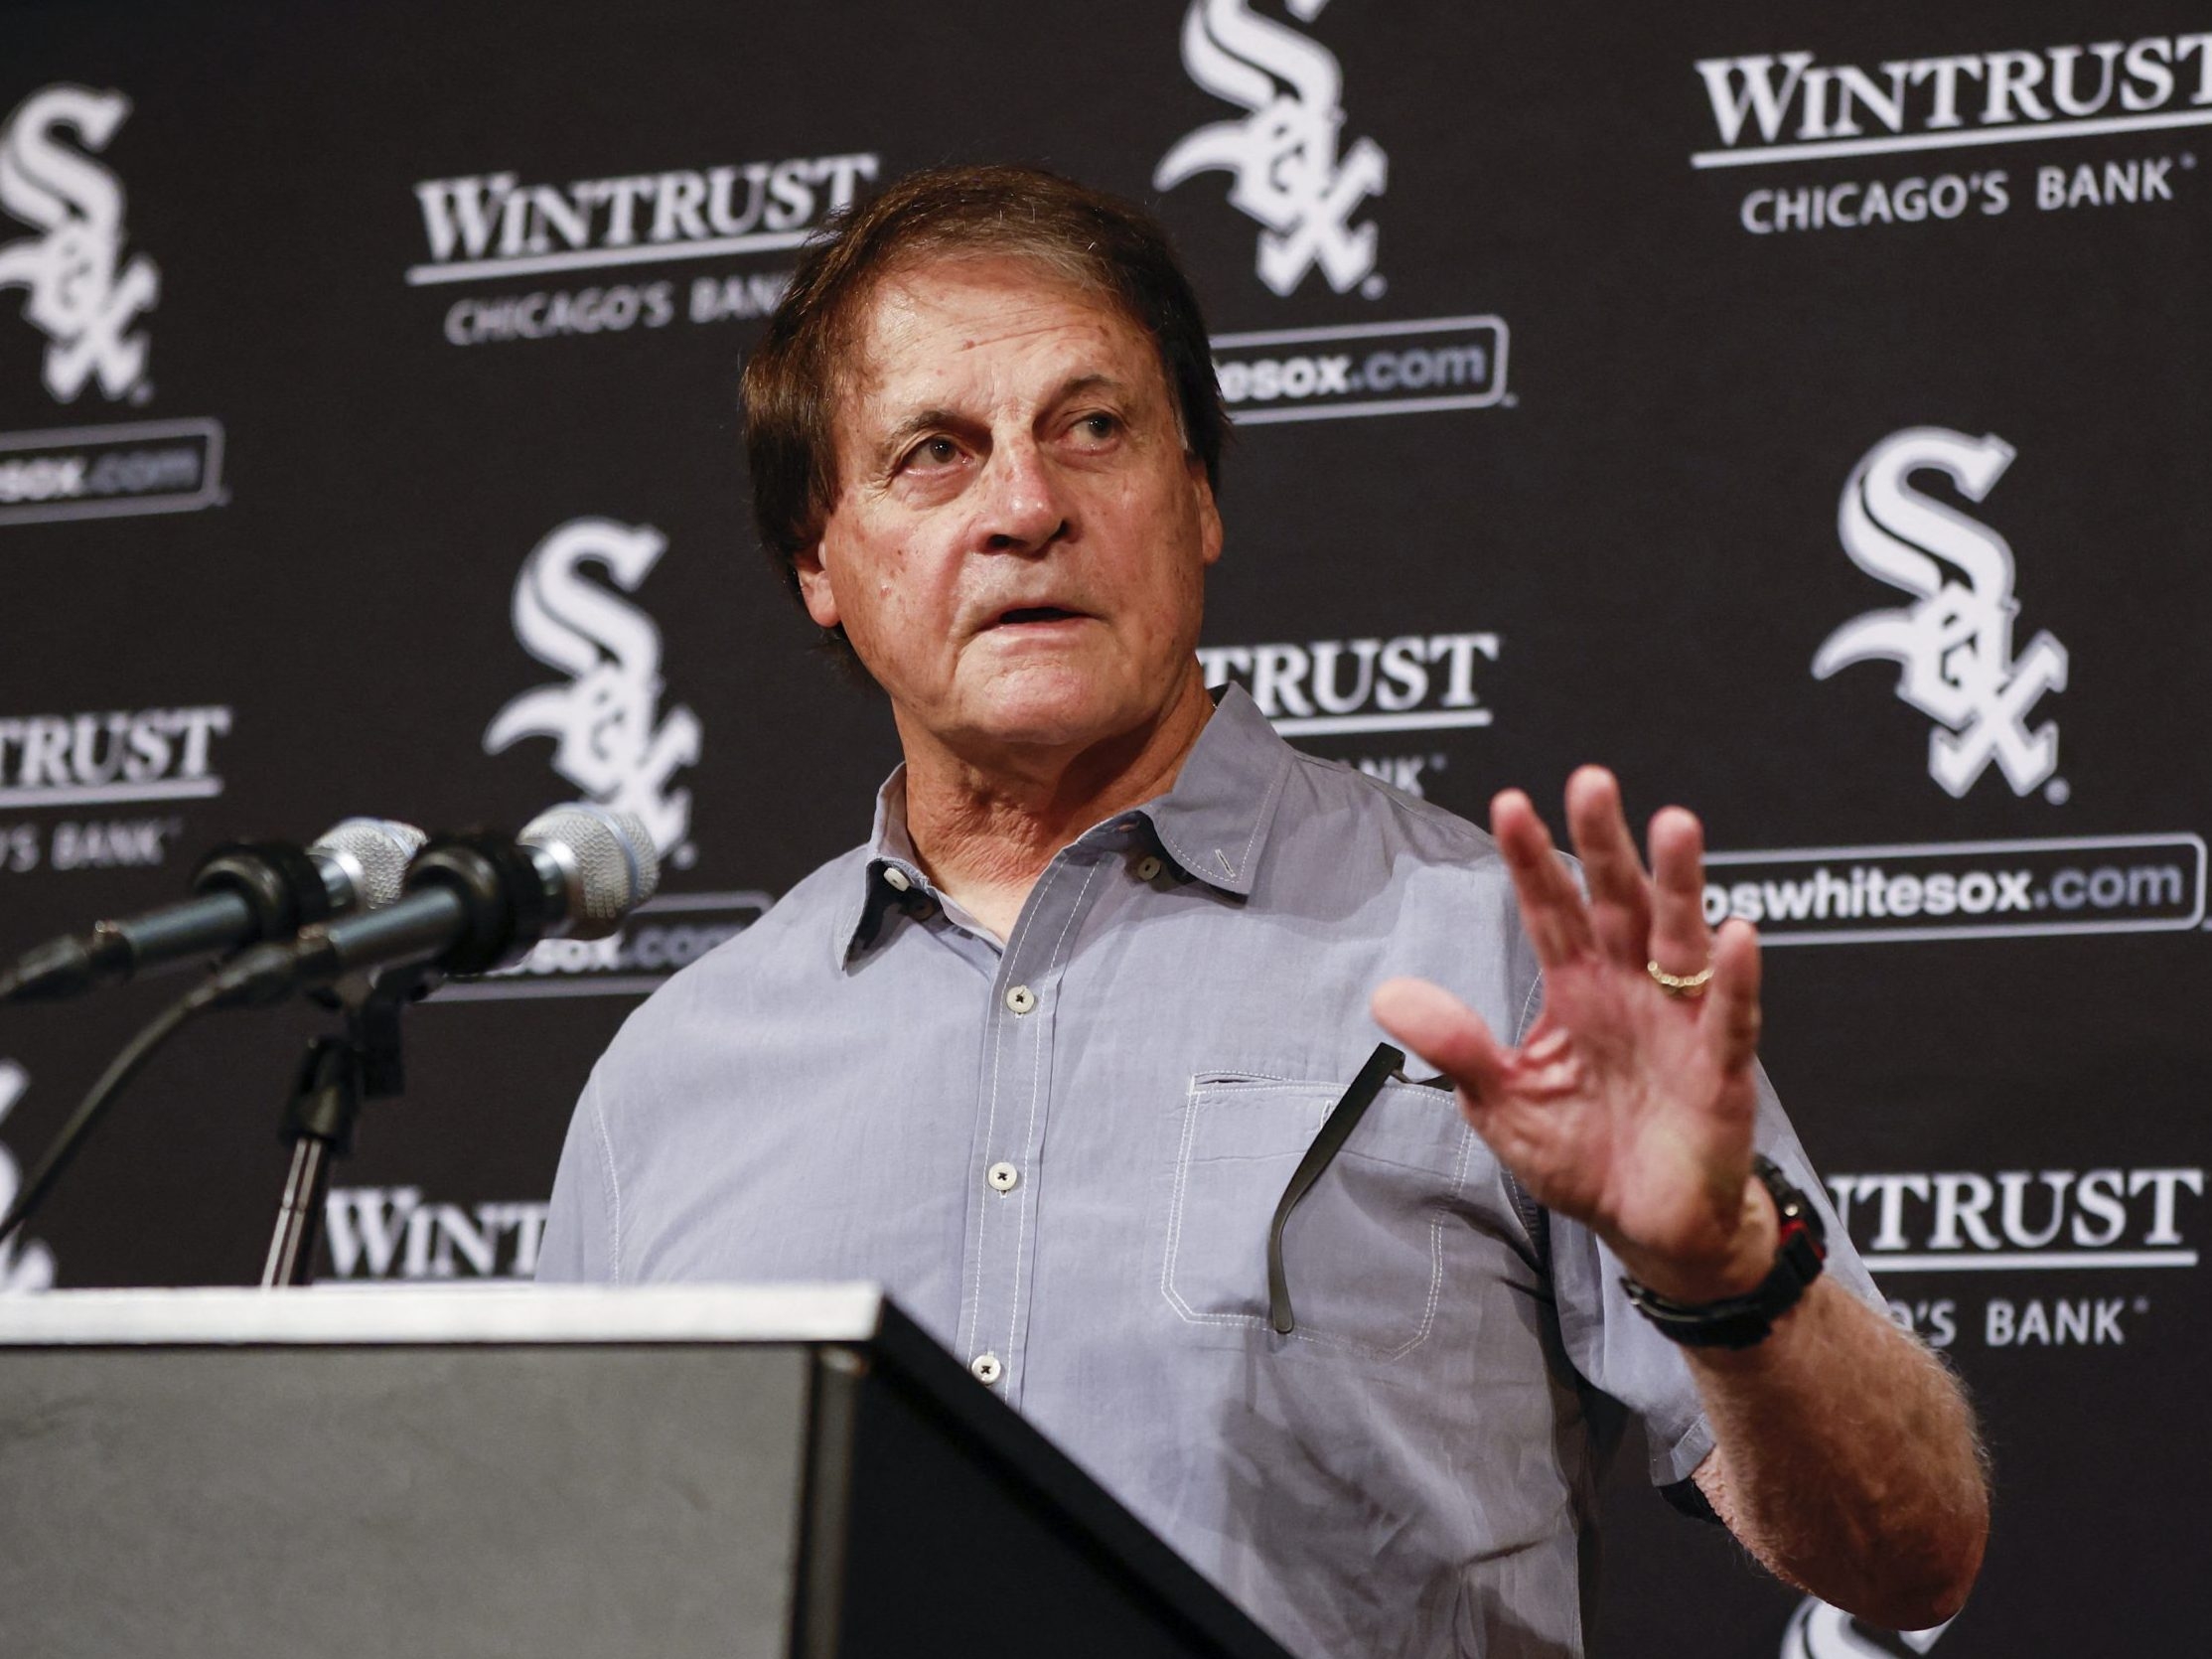 3 former White Sox to replace Tony La Russa as manager